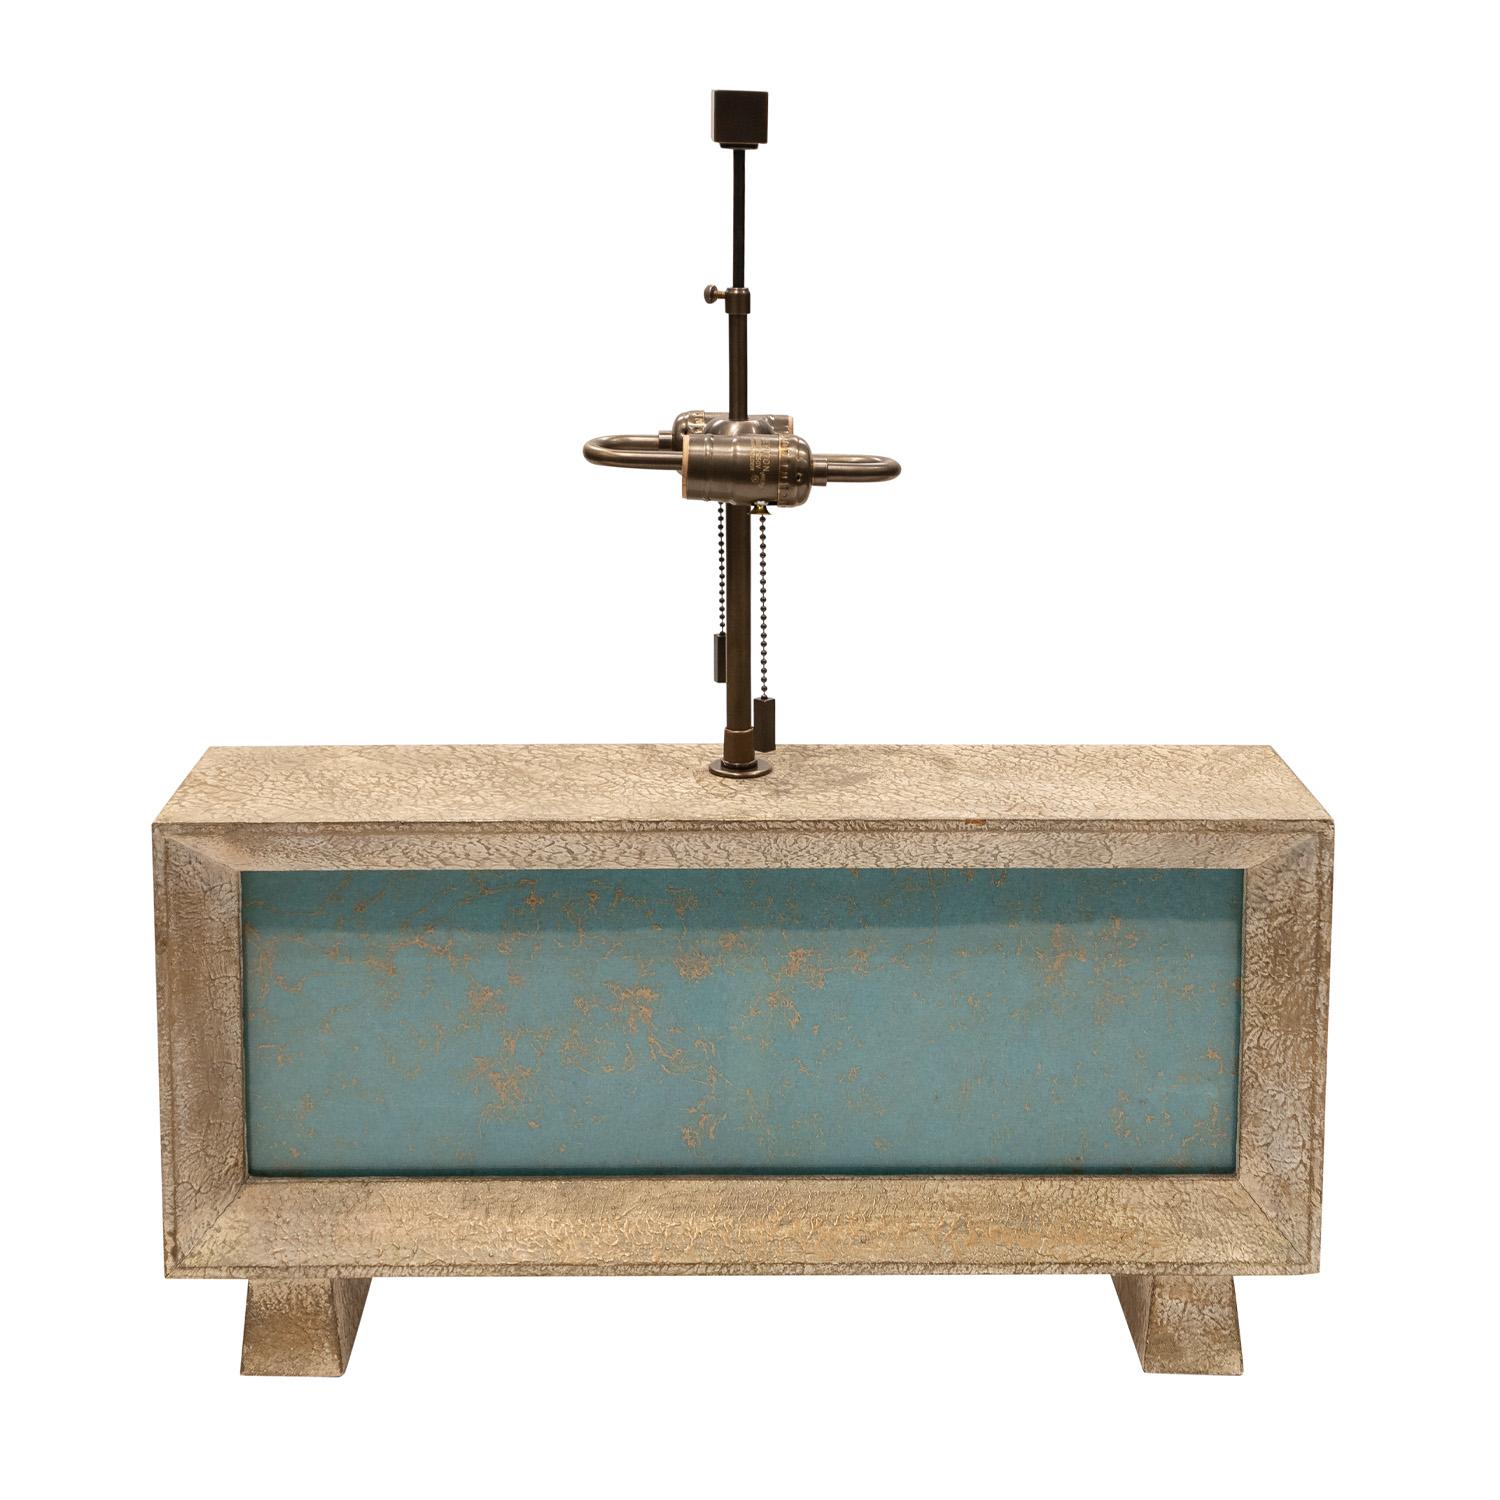 American Chic Boxy Table Lamp in Textured Resin with Illuminating Front Panel 1940s For Sale